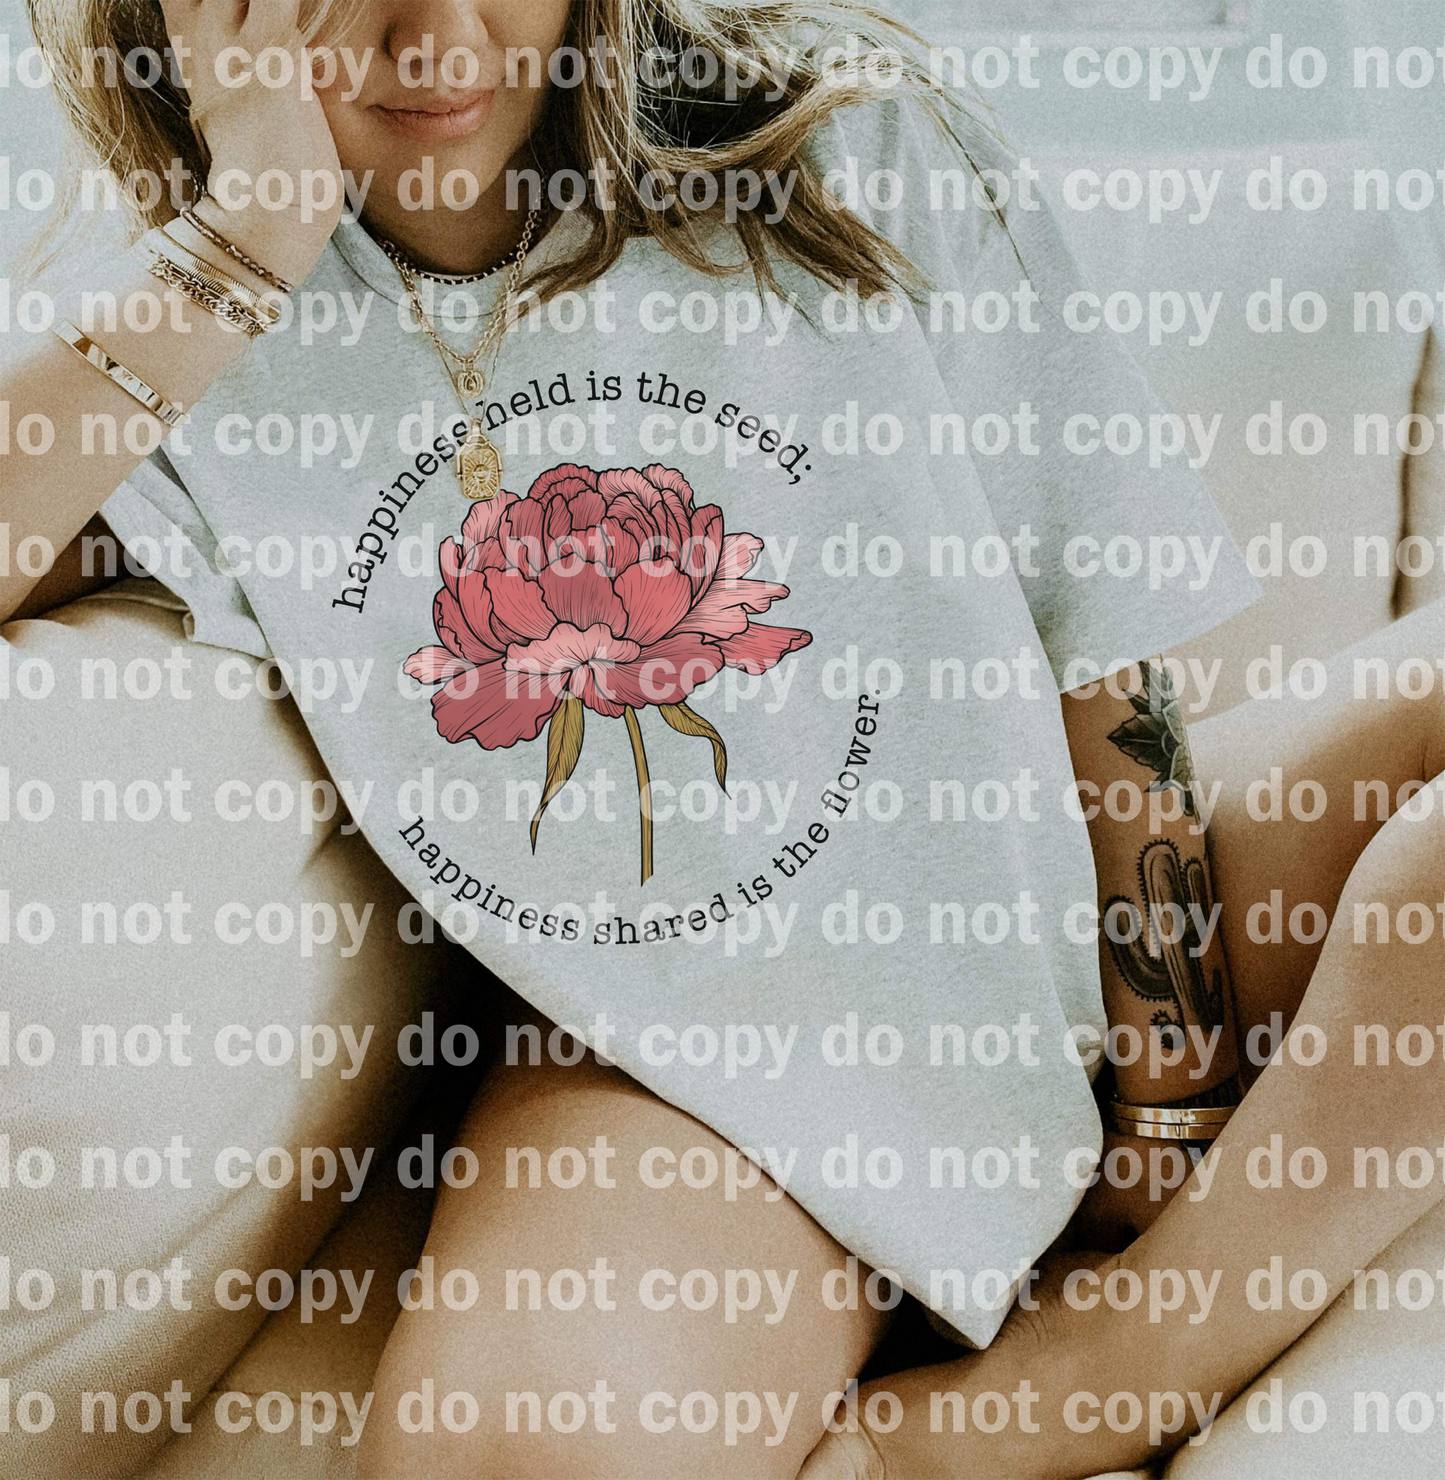 Happiness Held Is The Seed Happiness Shared Is The Flower Distressed/Non Distressed Dream Print or Sublimation Print